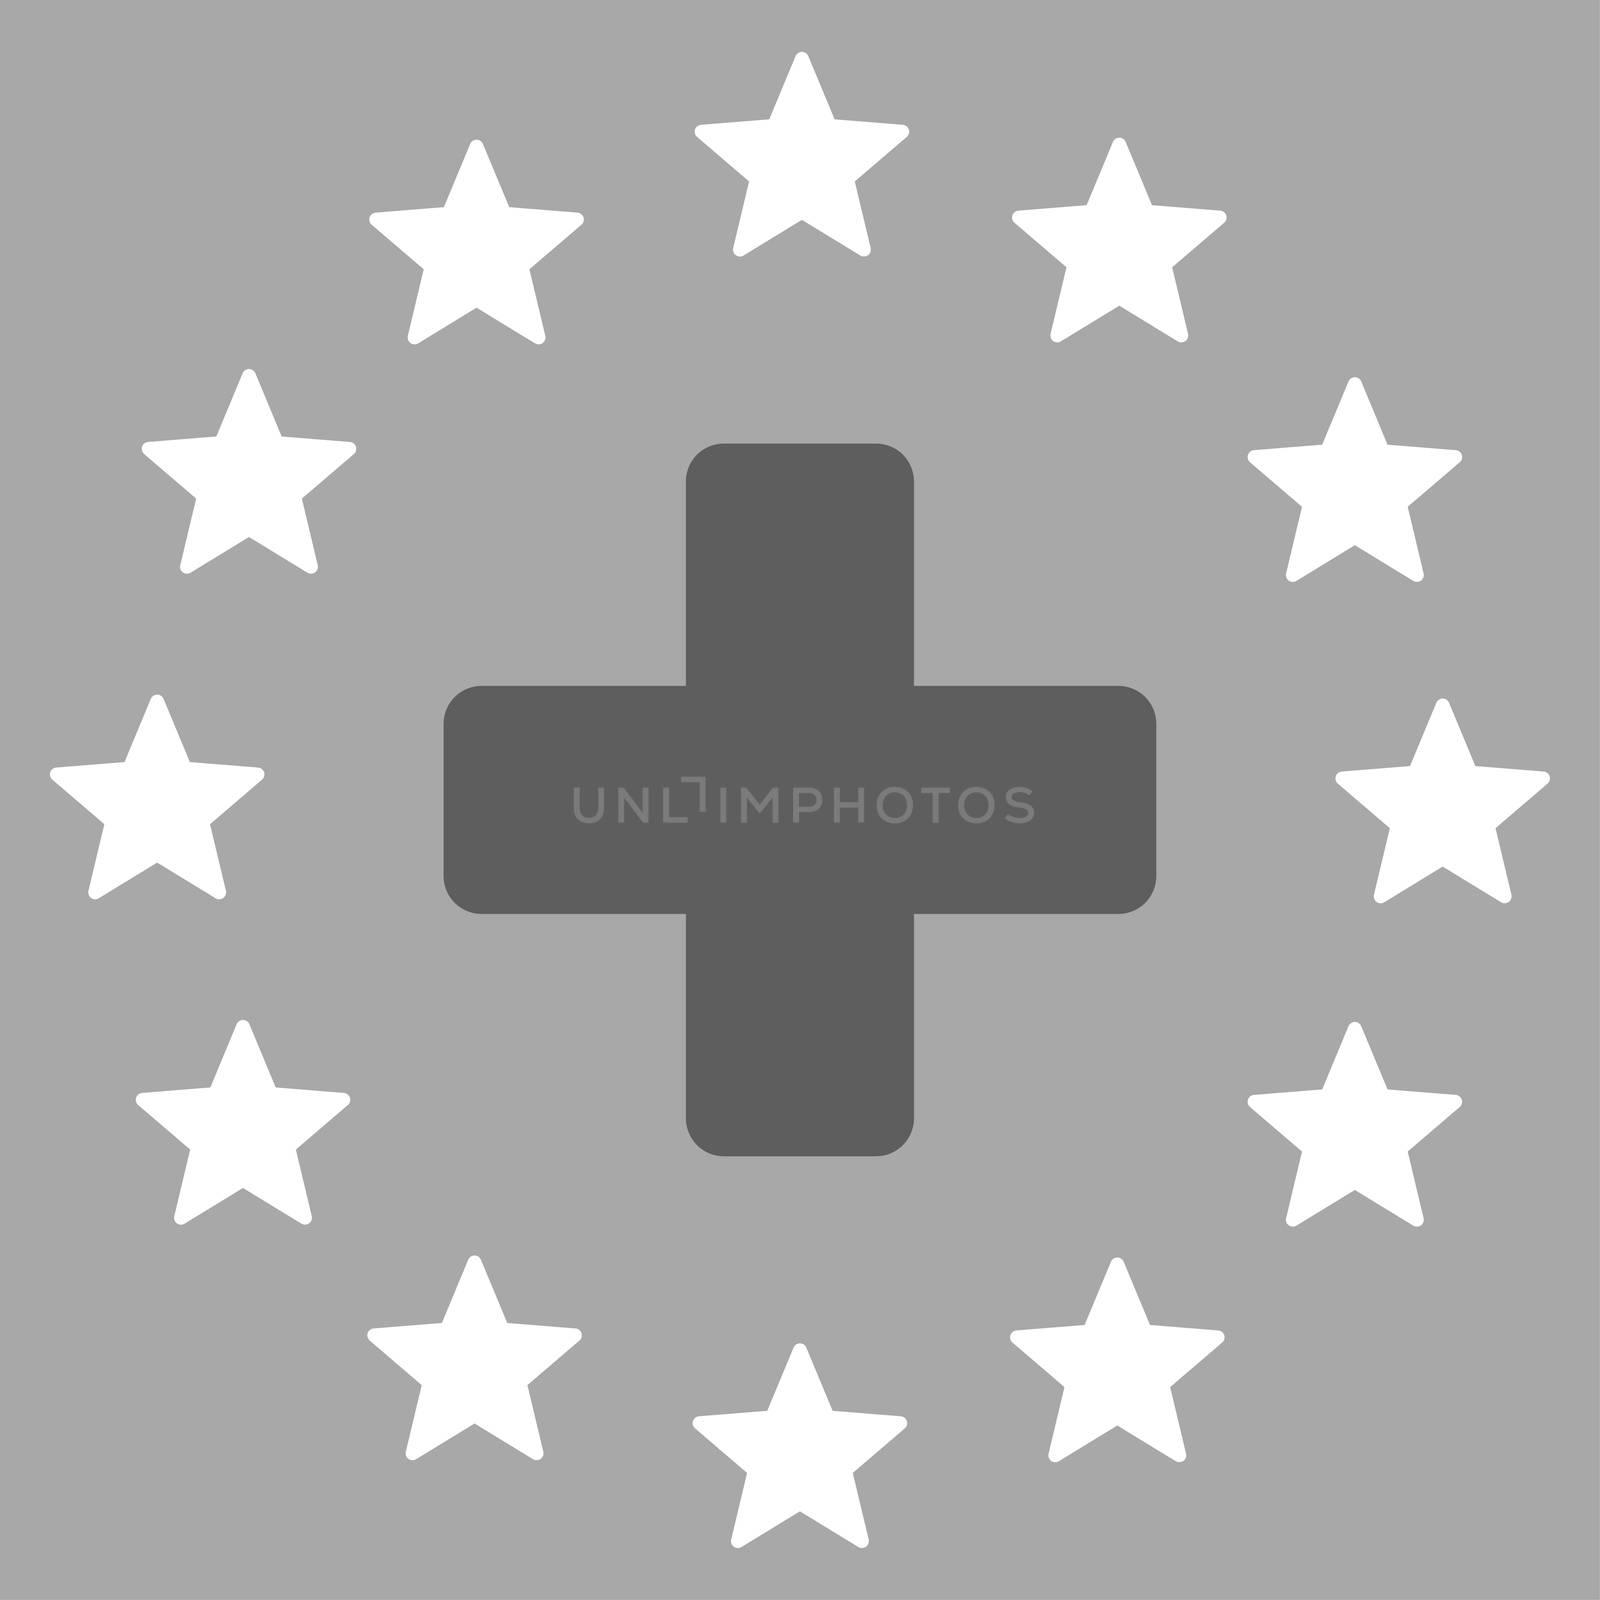 Euro Medicine raster icon. Style is bicolor flat symbol, dark gray and white colors, rounded angles, silver background.